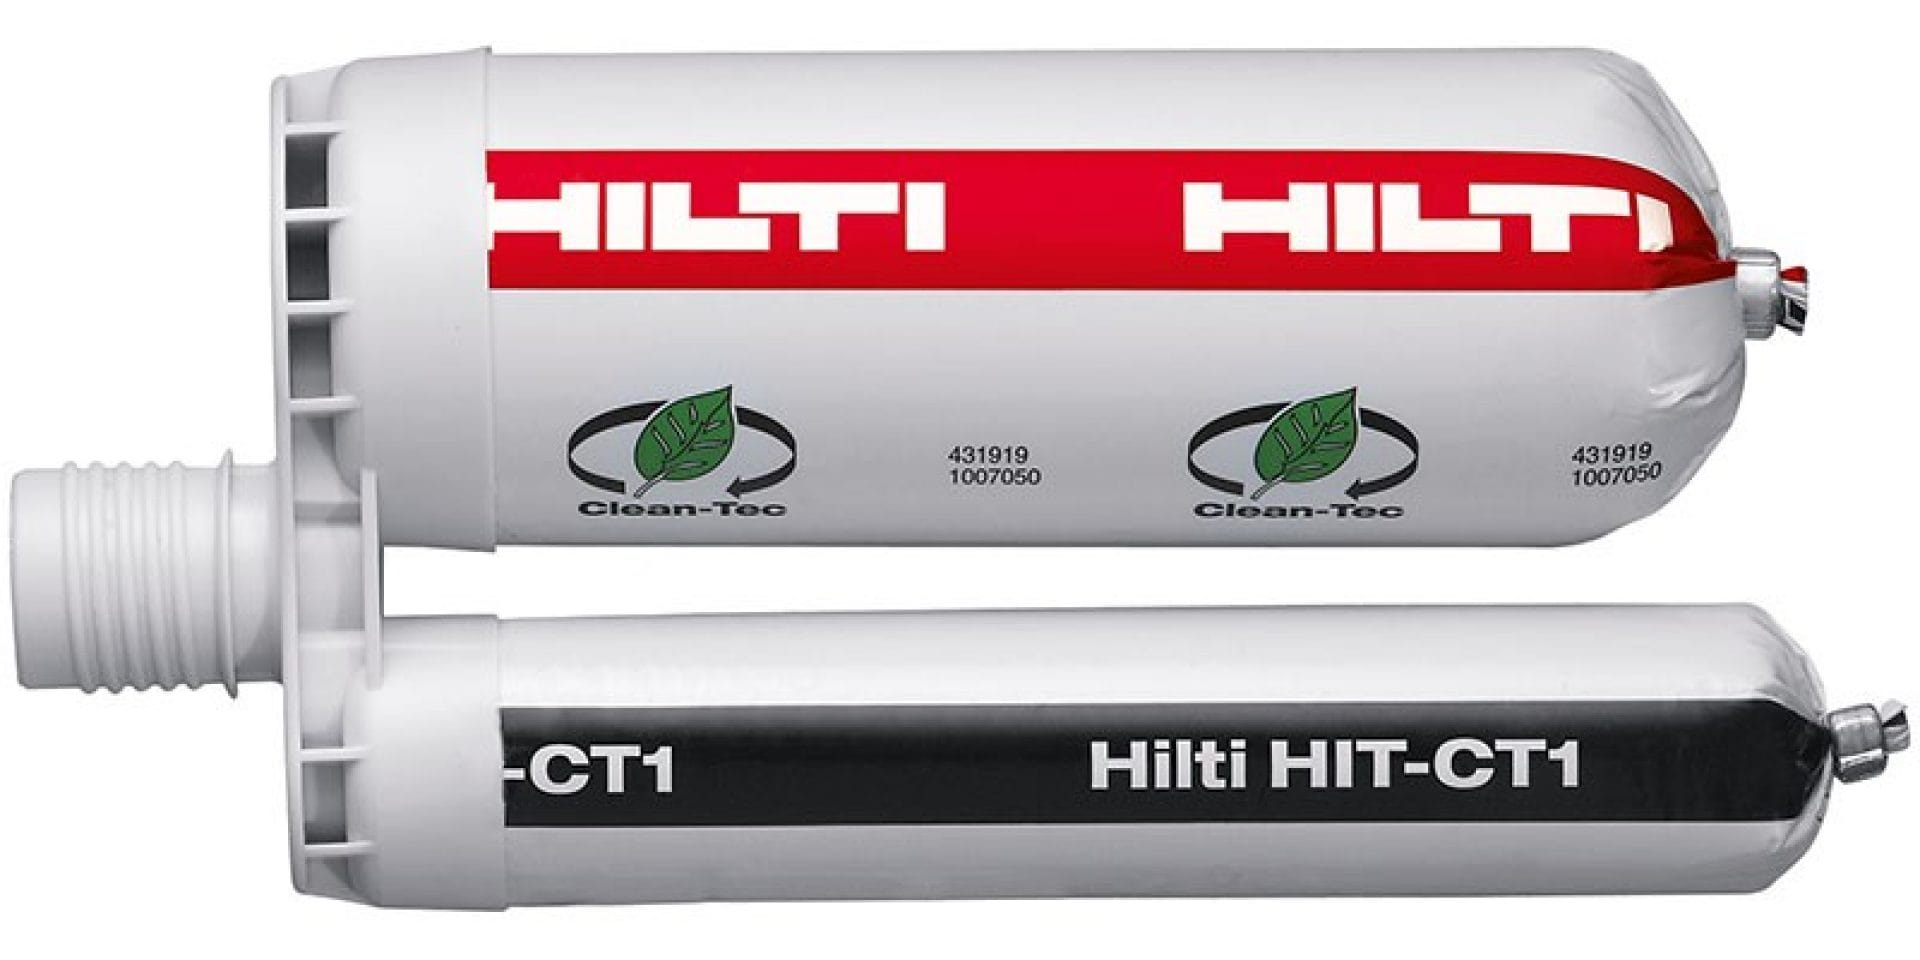 HIT-CT 1 clean-technology mortar for concrete as part of the Hilti SafeSet system